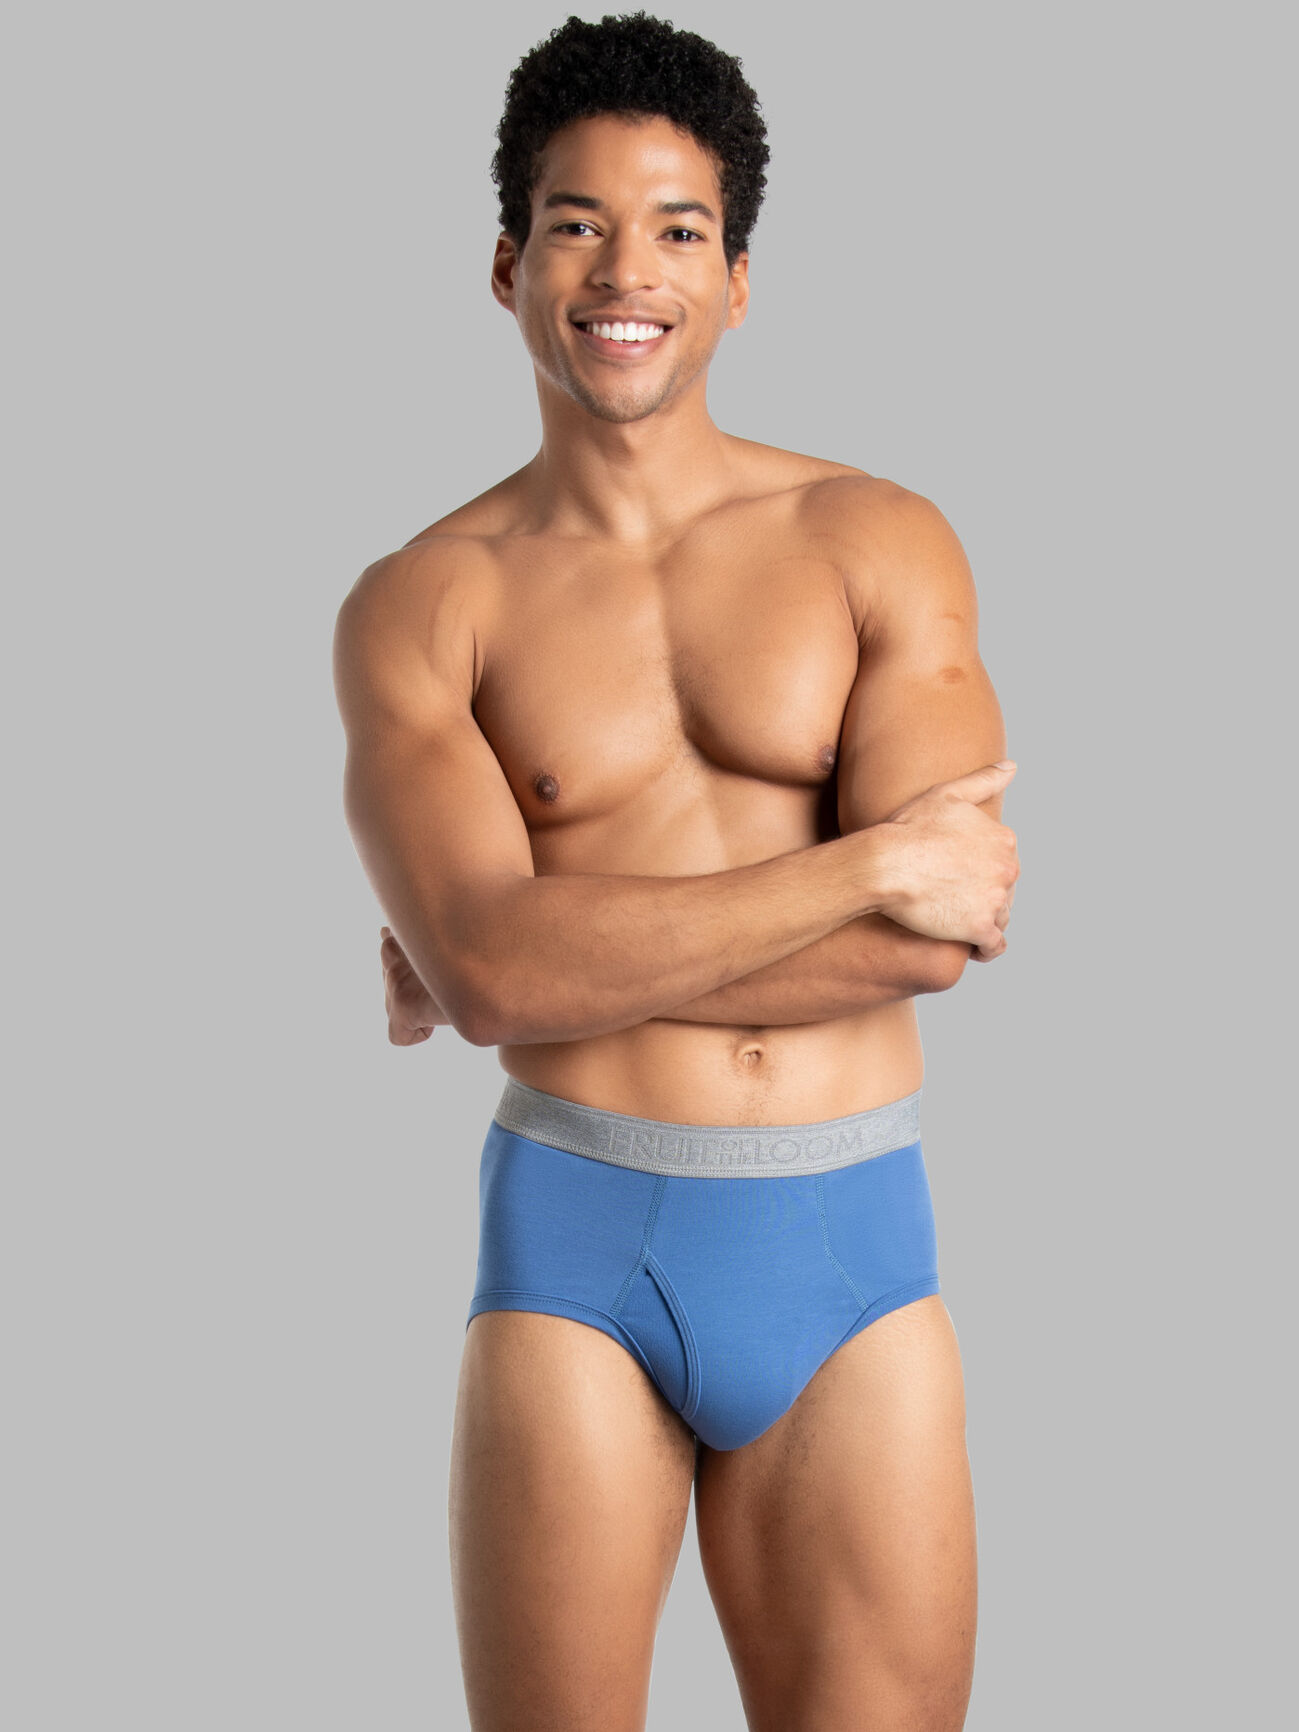 Low Waist Briefs for Men Cotton and Breathable with Elastic Band M 3XL